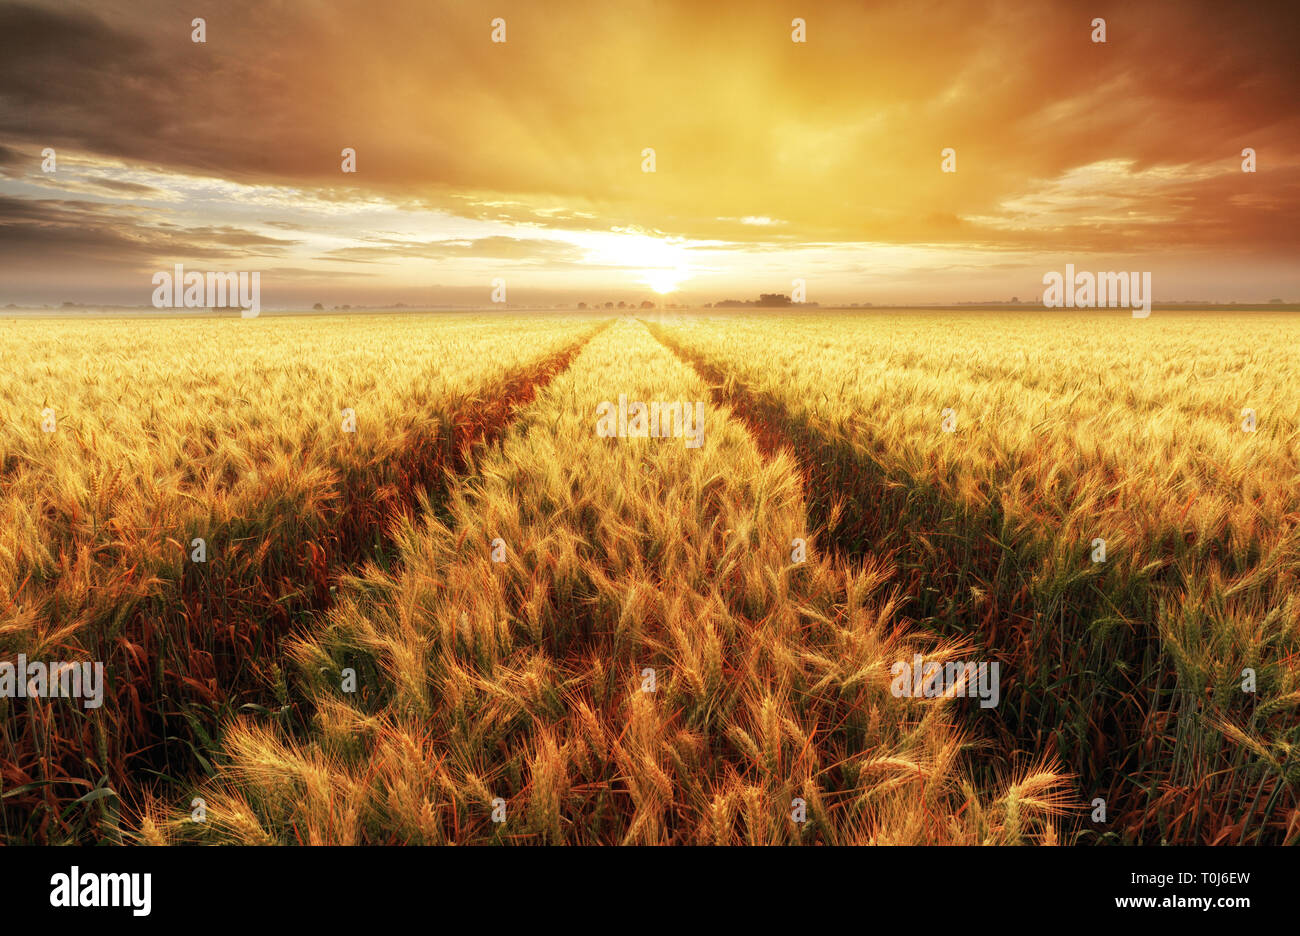 Wheat field with gold sunset landscape, Agriculture industry Stock Photo